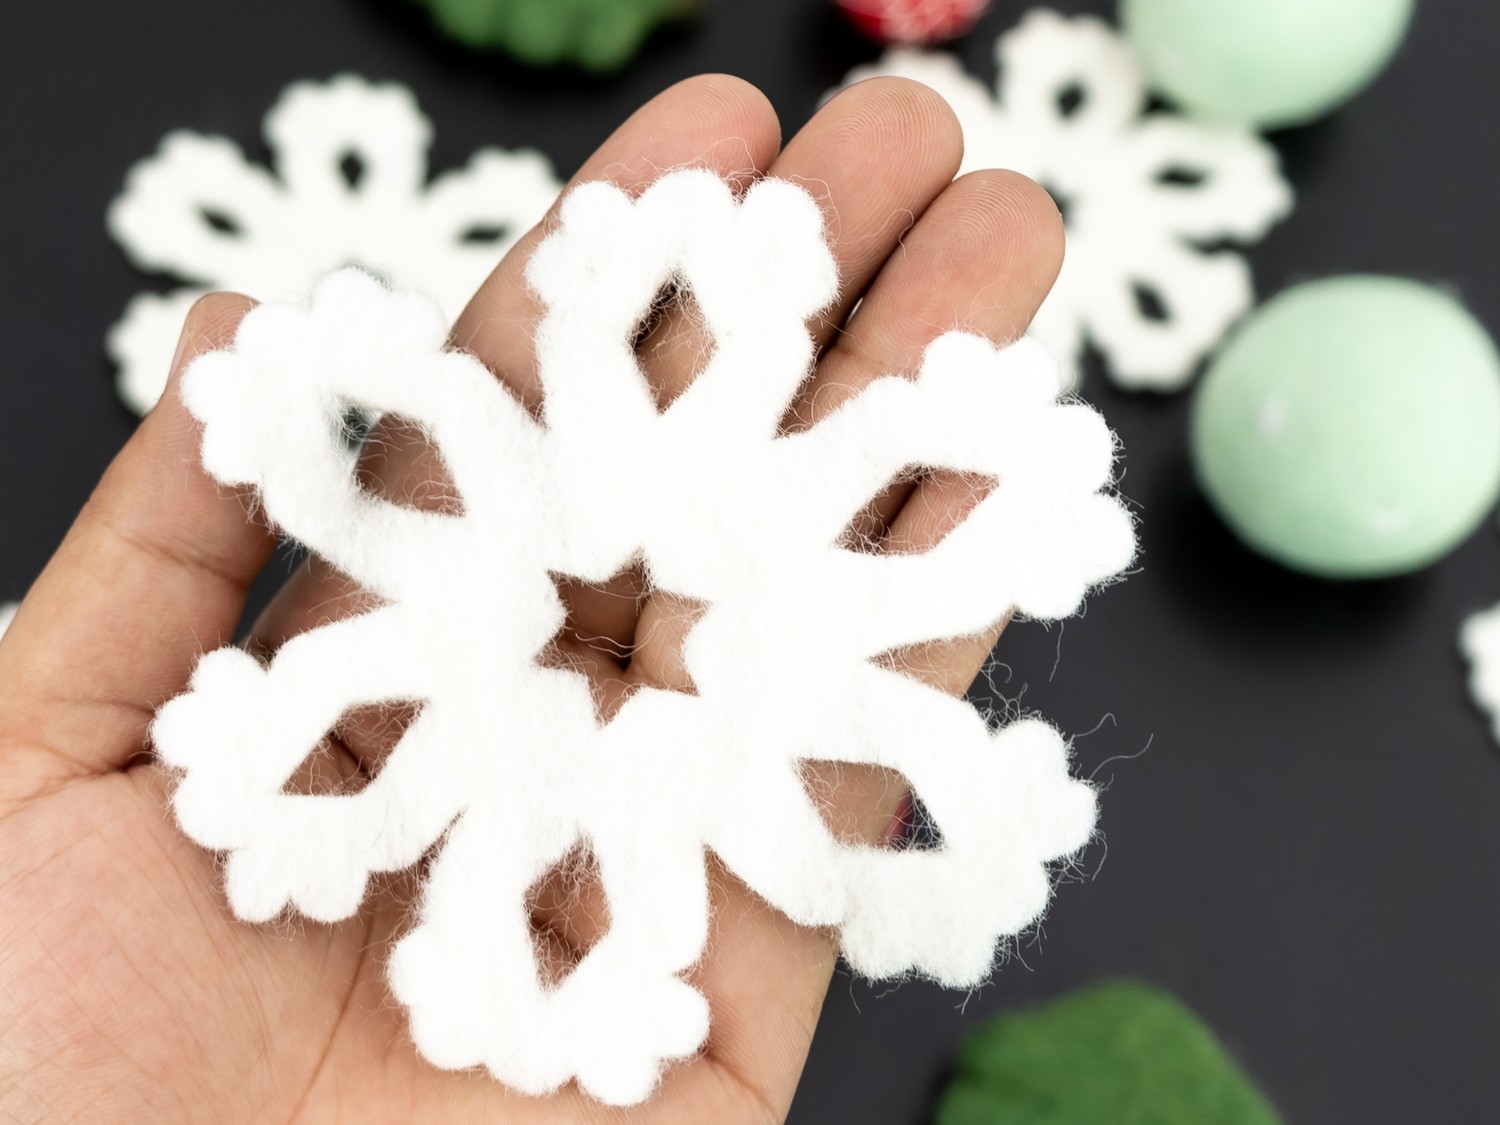 7cm Felt Snowflakes for Christmas - Free Shipping by Felt and Yarn